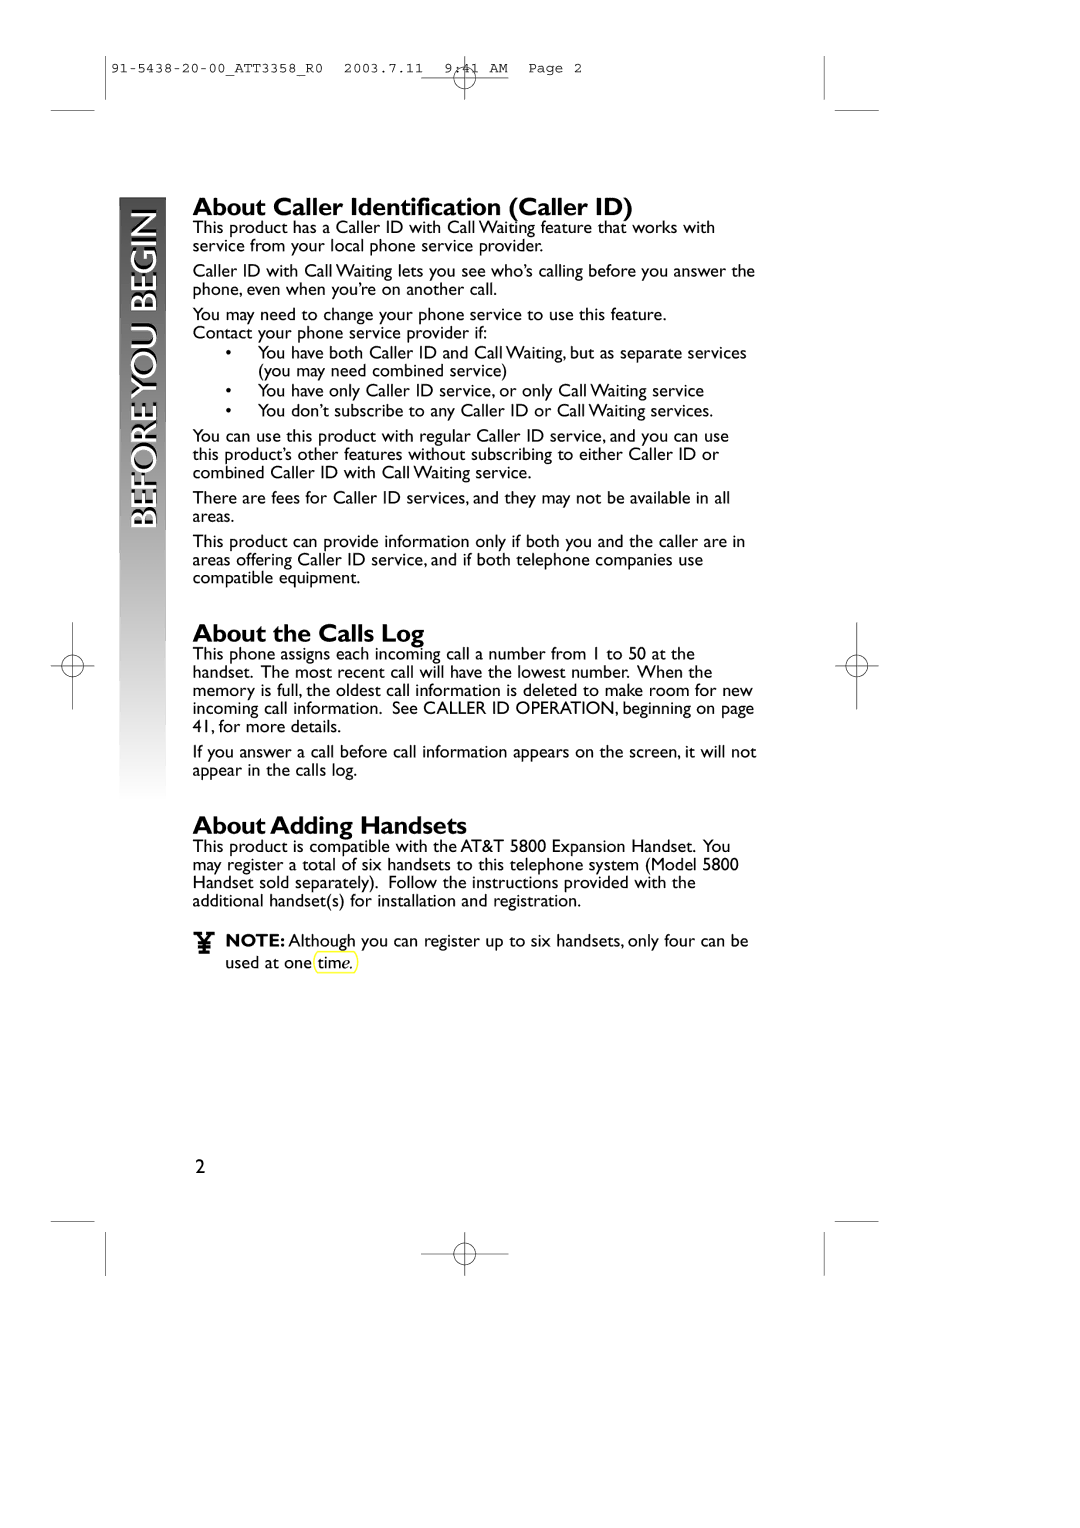 AT&T 3358 user manual About Caller Identification Caller ID, About the Calls Log, About Adding Handsets 